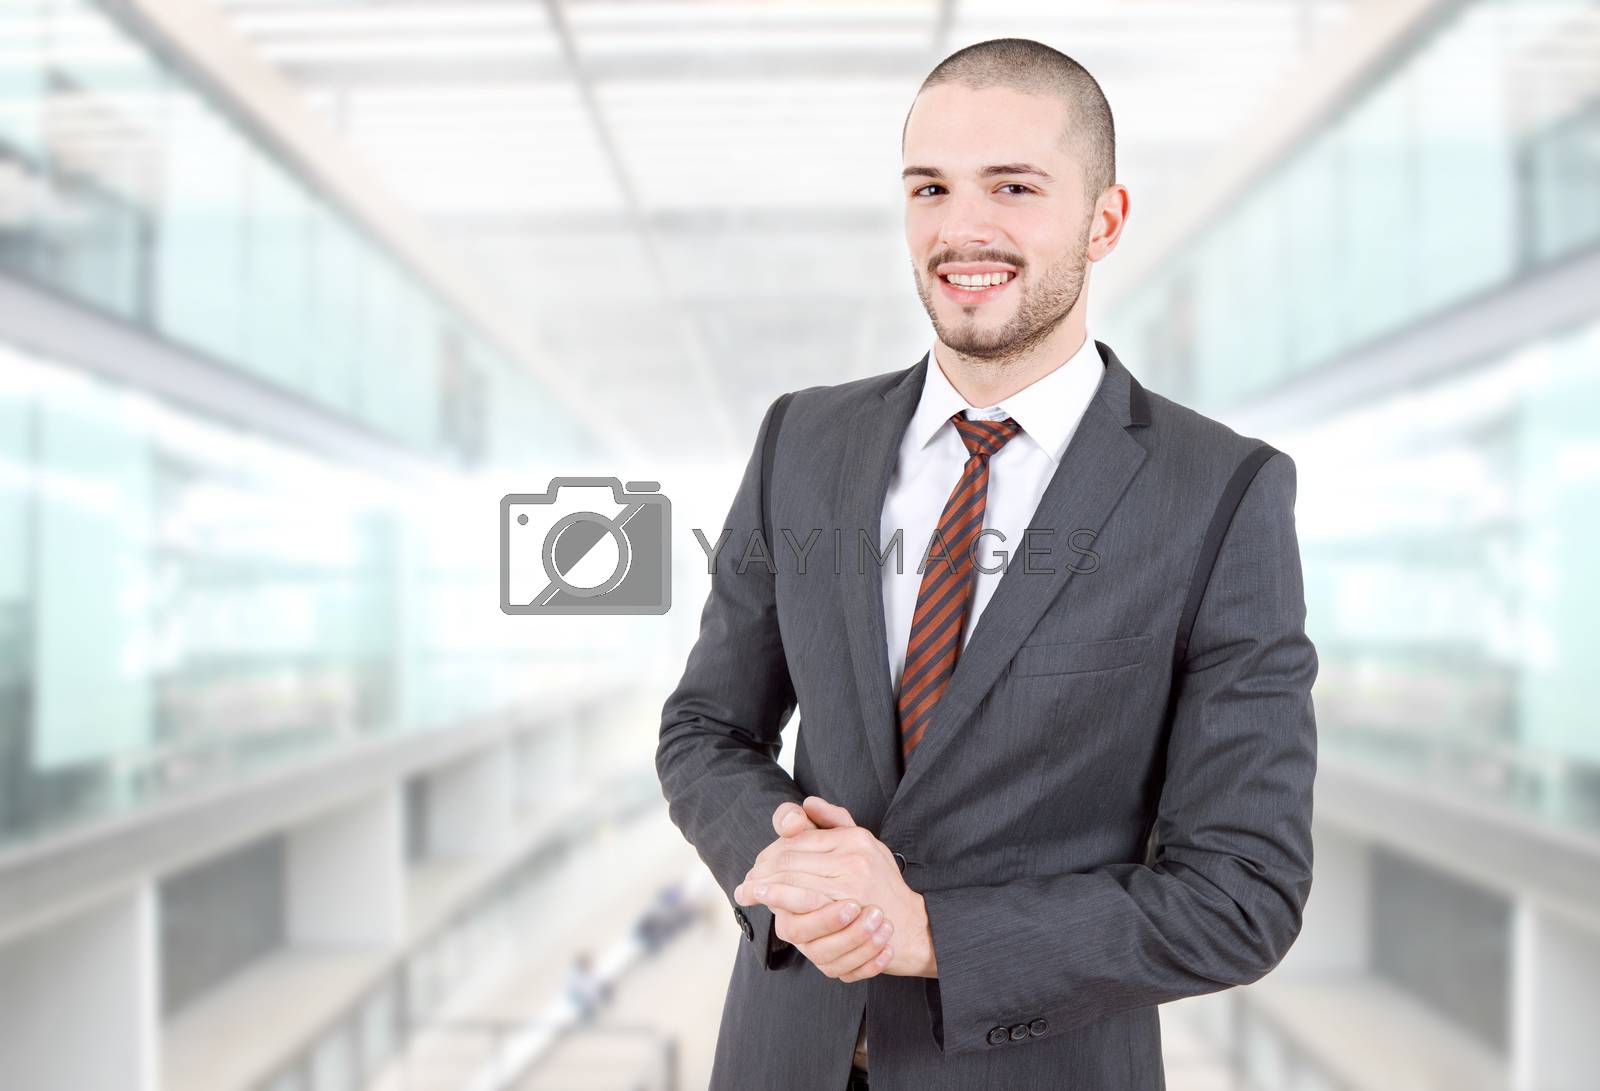 Royalty free image of business man by zittto